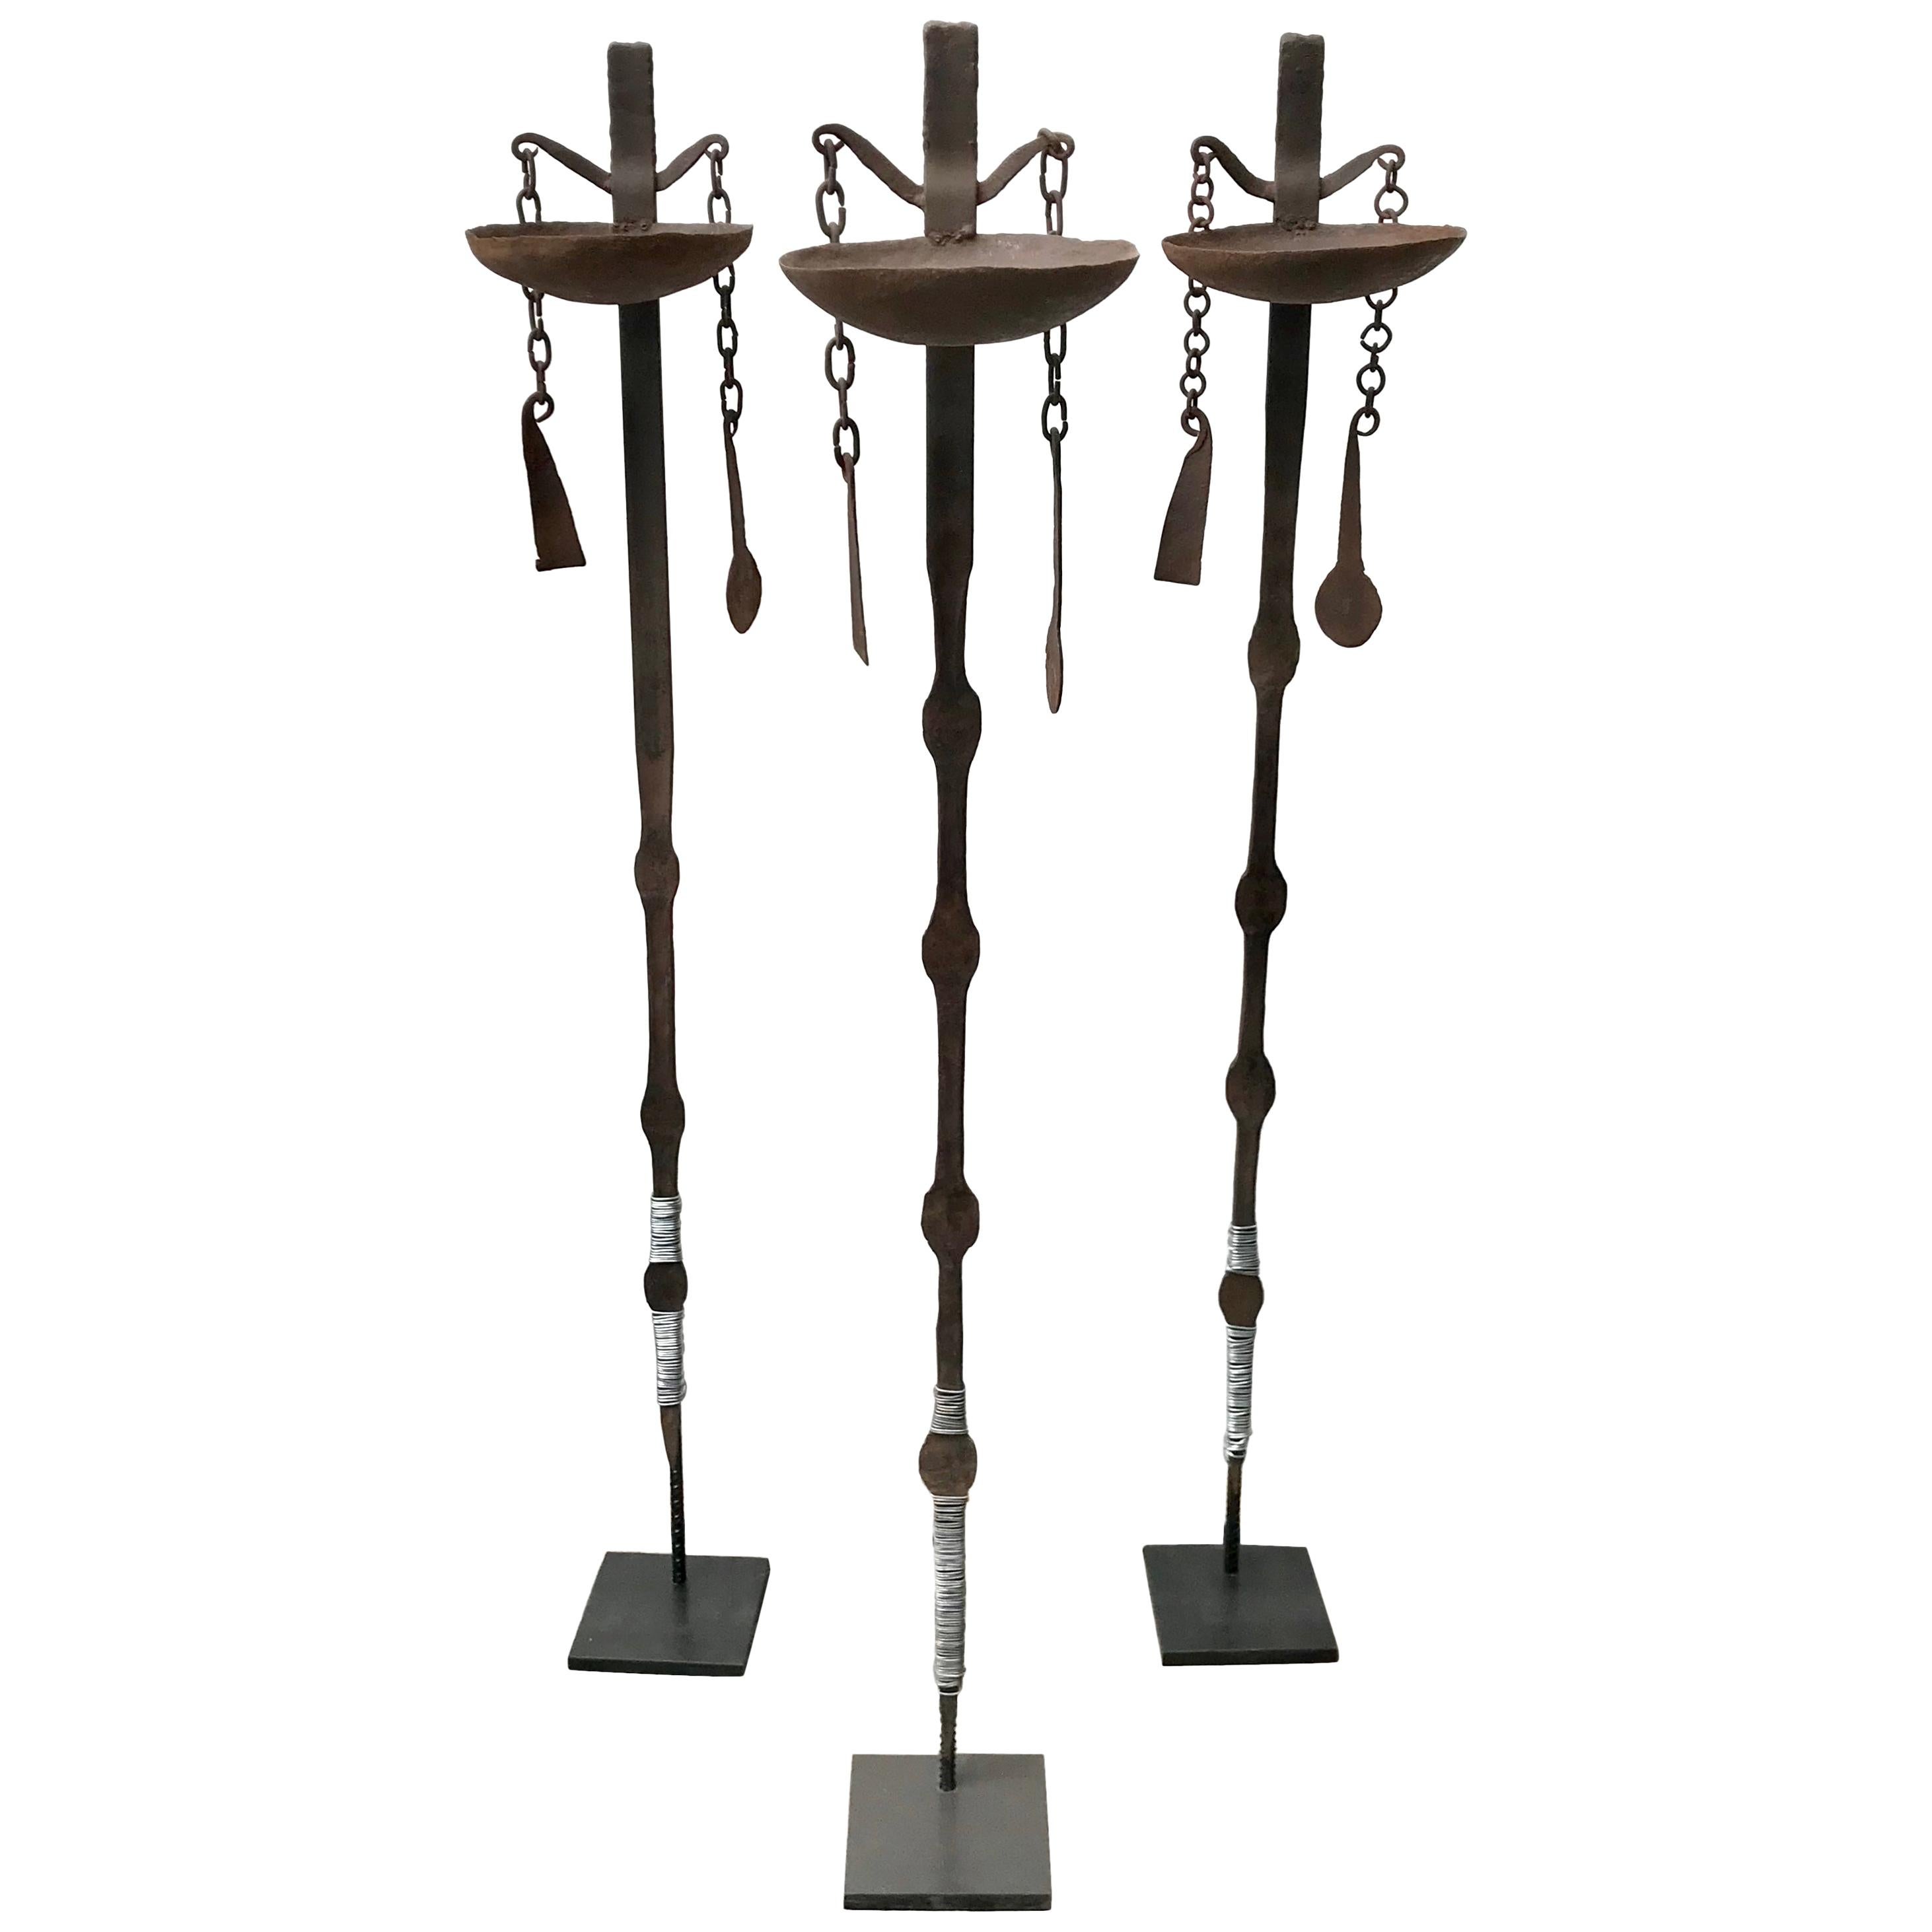 Three African Forged Iron Oil Lamps For Sale